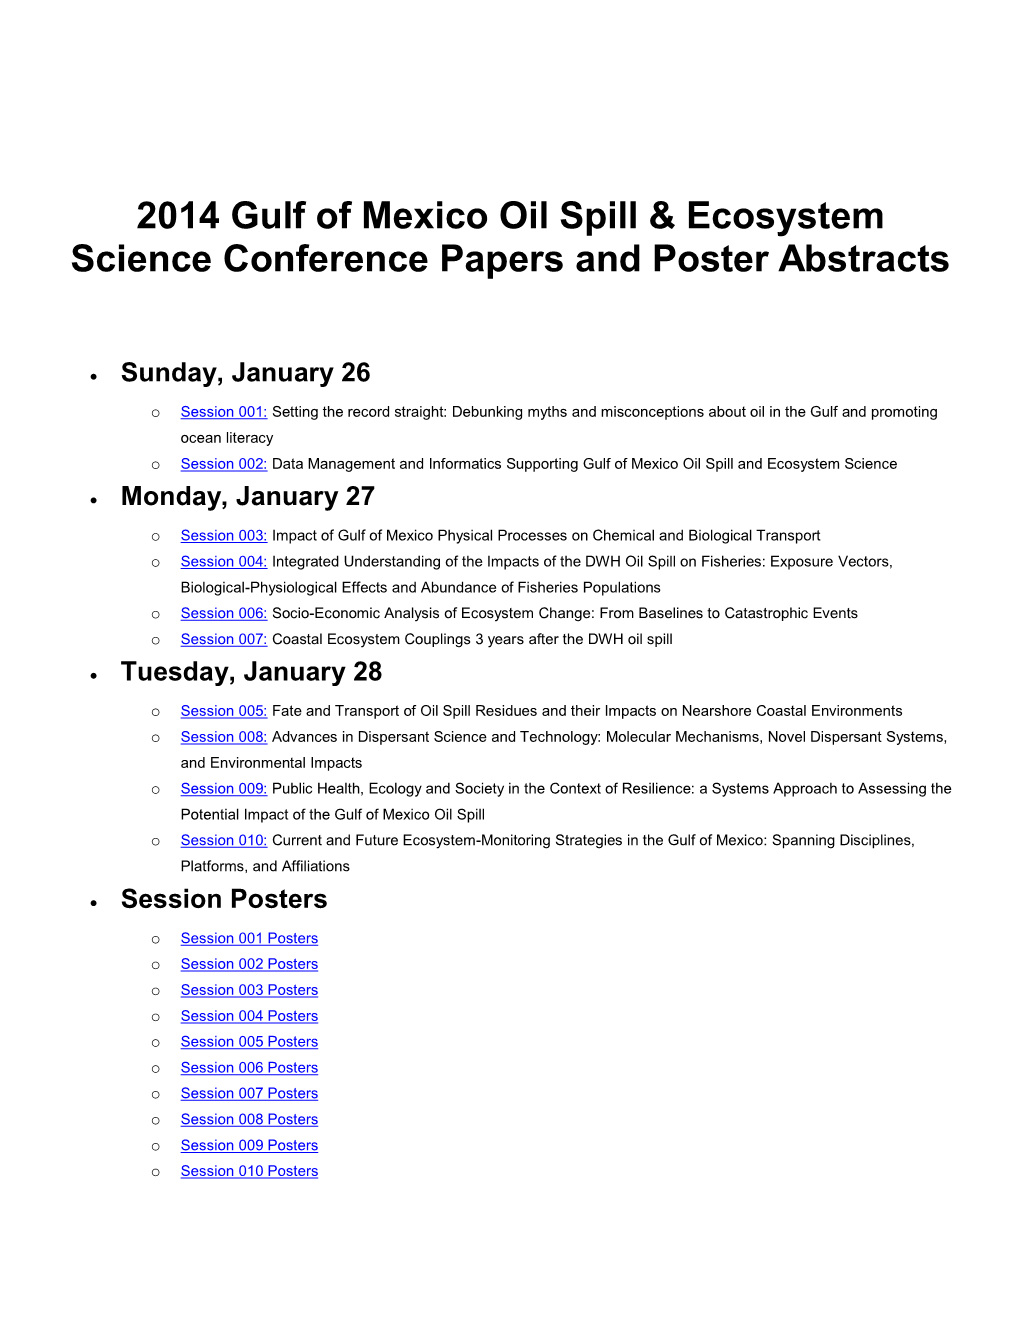 2014 Gulf of Mexico Oil Spill & Ecosystem Science Conference